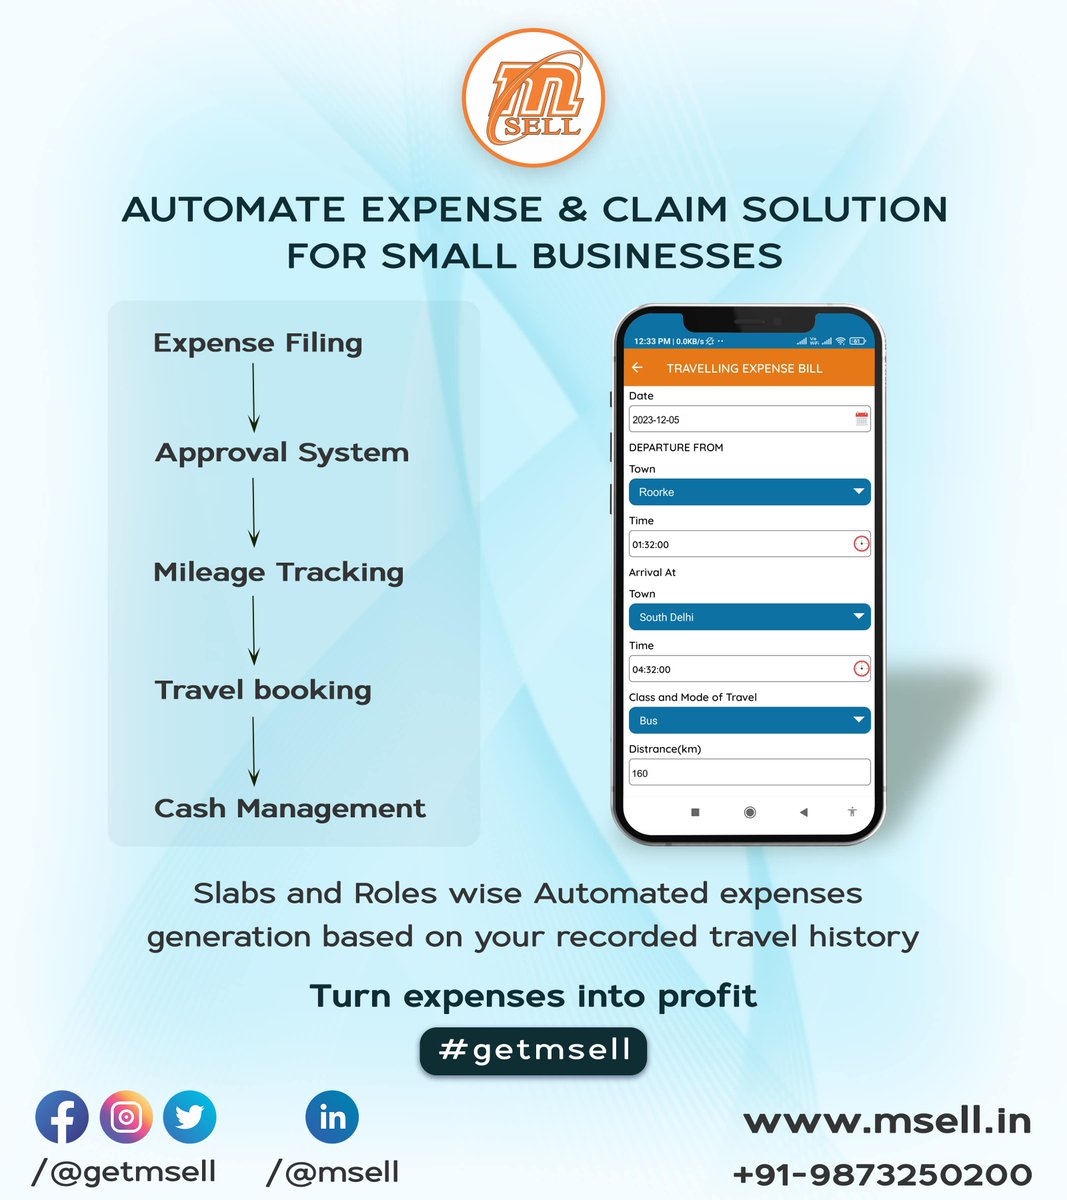 A Unified Expense and Claim Solution from mSELL. Digitize your Expense and Claim management with mSELL.

Contact us directly @ +91-9873250200.
#expensemanagement #hrms #salesforceautomation #saas #salesforceindia #india #msmes #msmeindia #fmcgindustry #beverageindustry #fmcg #cpg